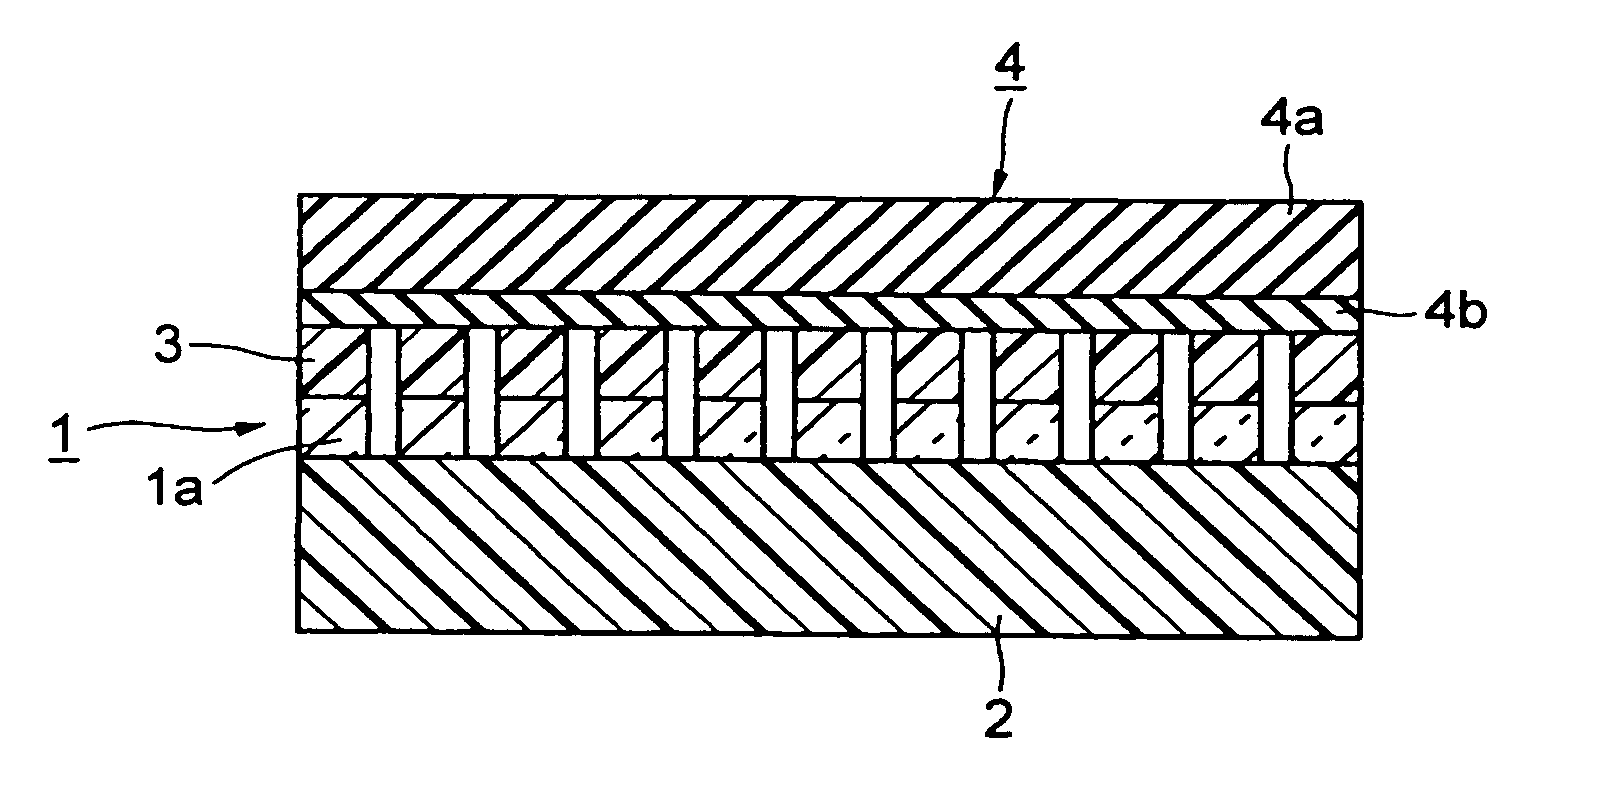 Acoustic lens and ultrasonic probe using the lens